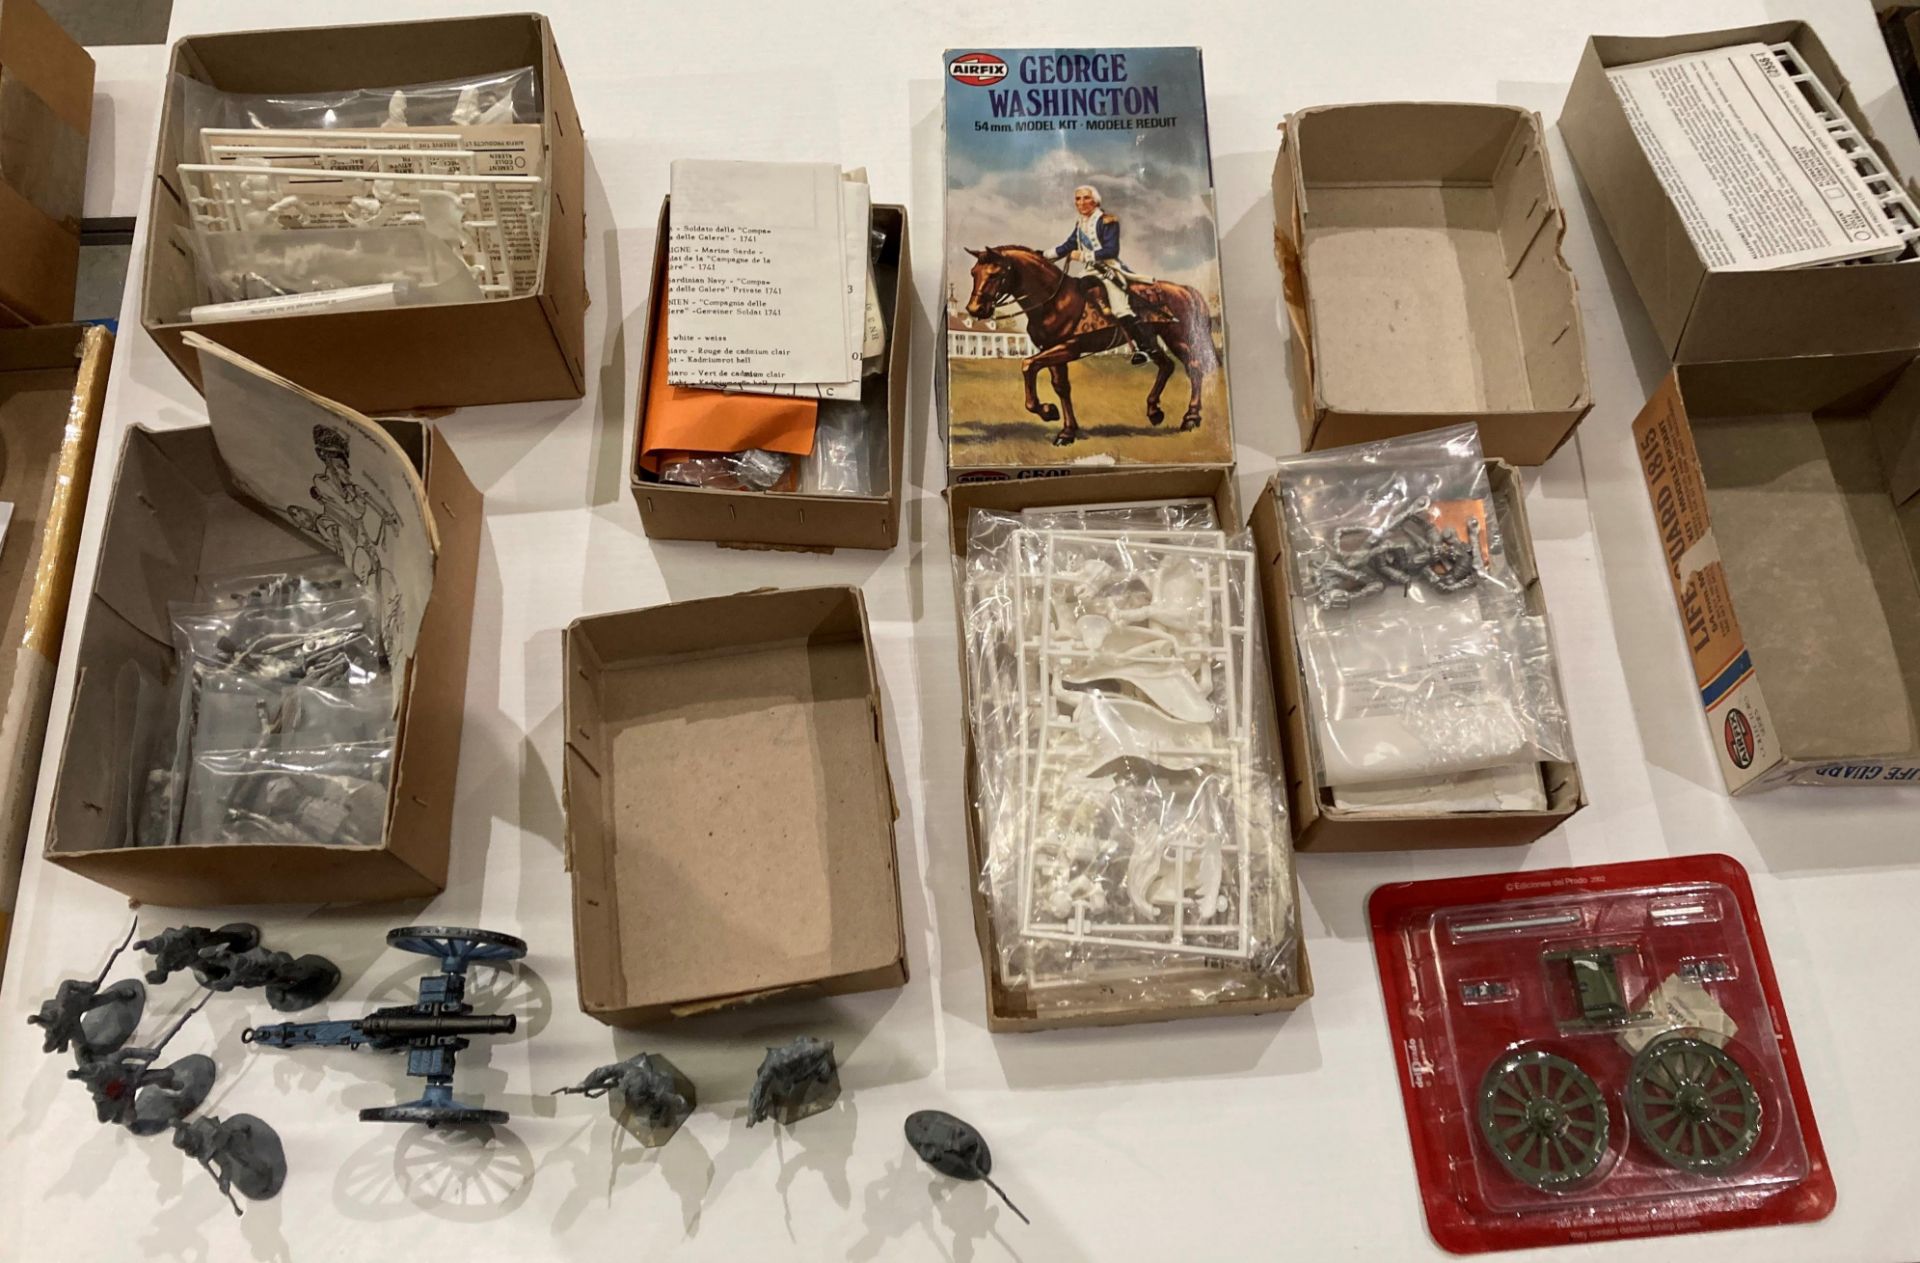 Contents to two boxes - scale model soldiers in metal and plastic to build-up,